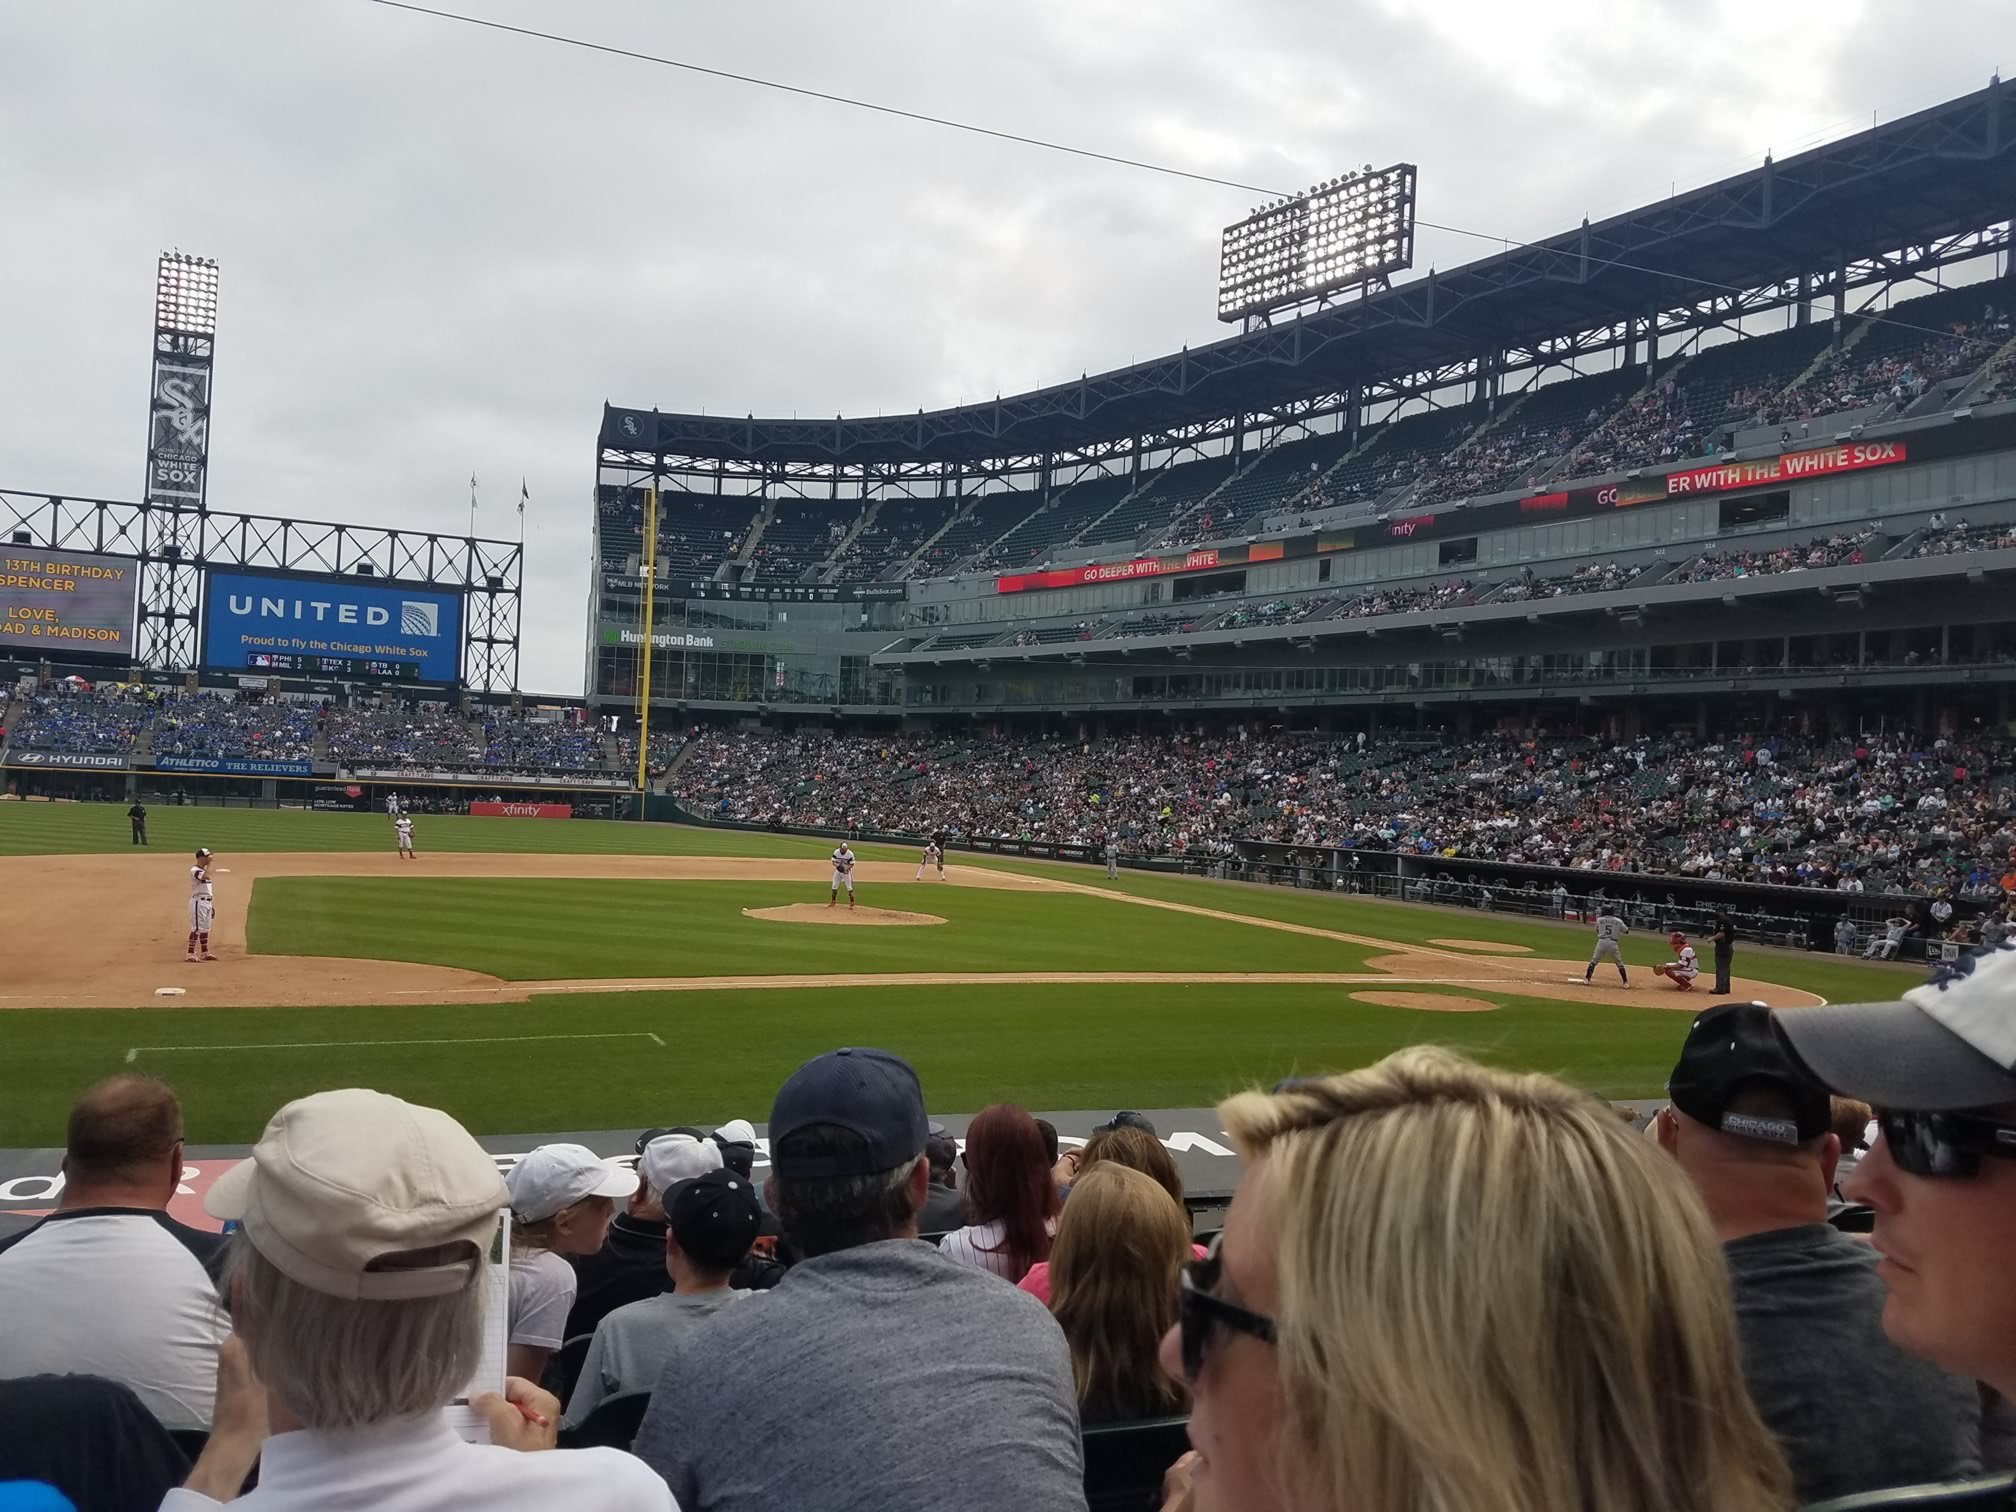 section 141, row 11 seat view  - guaranteed rate field